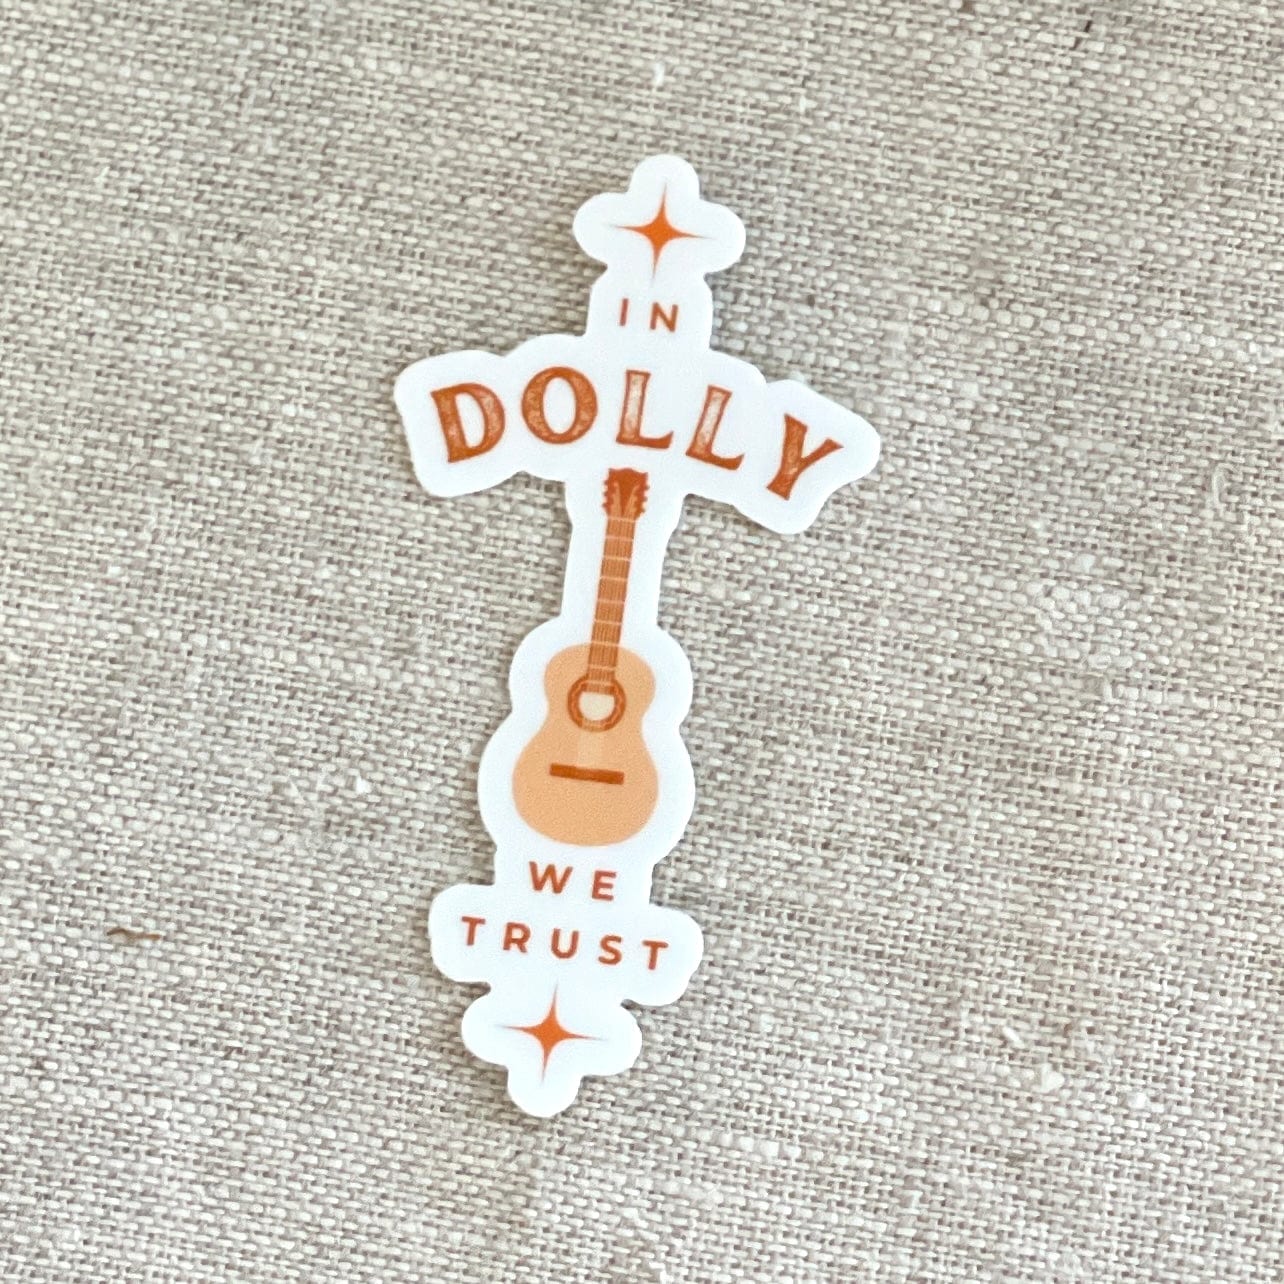 Dolly Inviting Affairs Paperie Sticker - PORCH